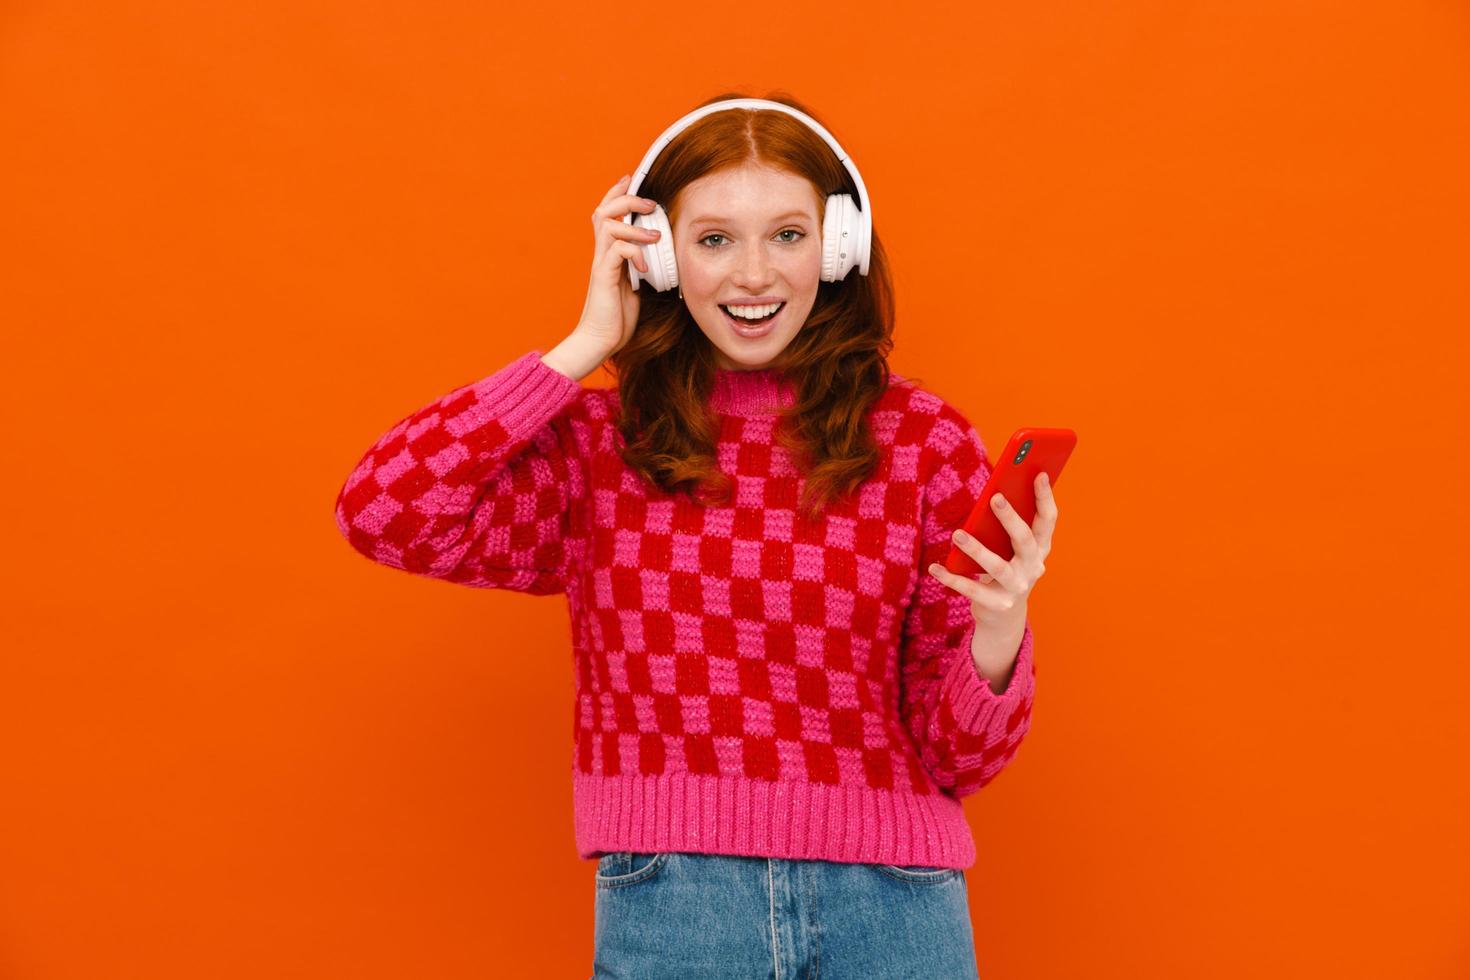 Young smiling ginger-haired woman in plaid sweater using cell phone and headphones photo